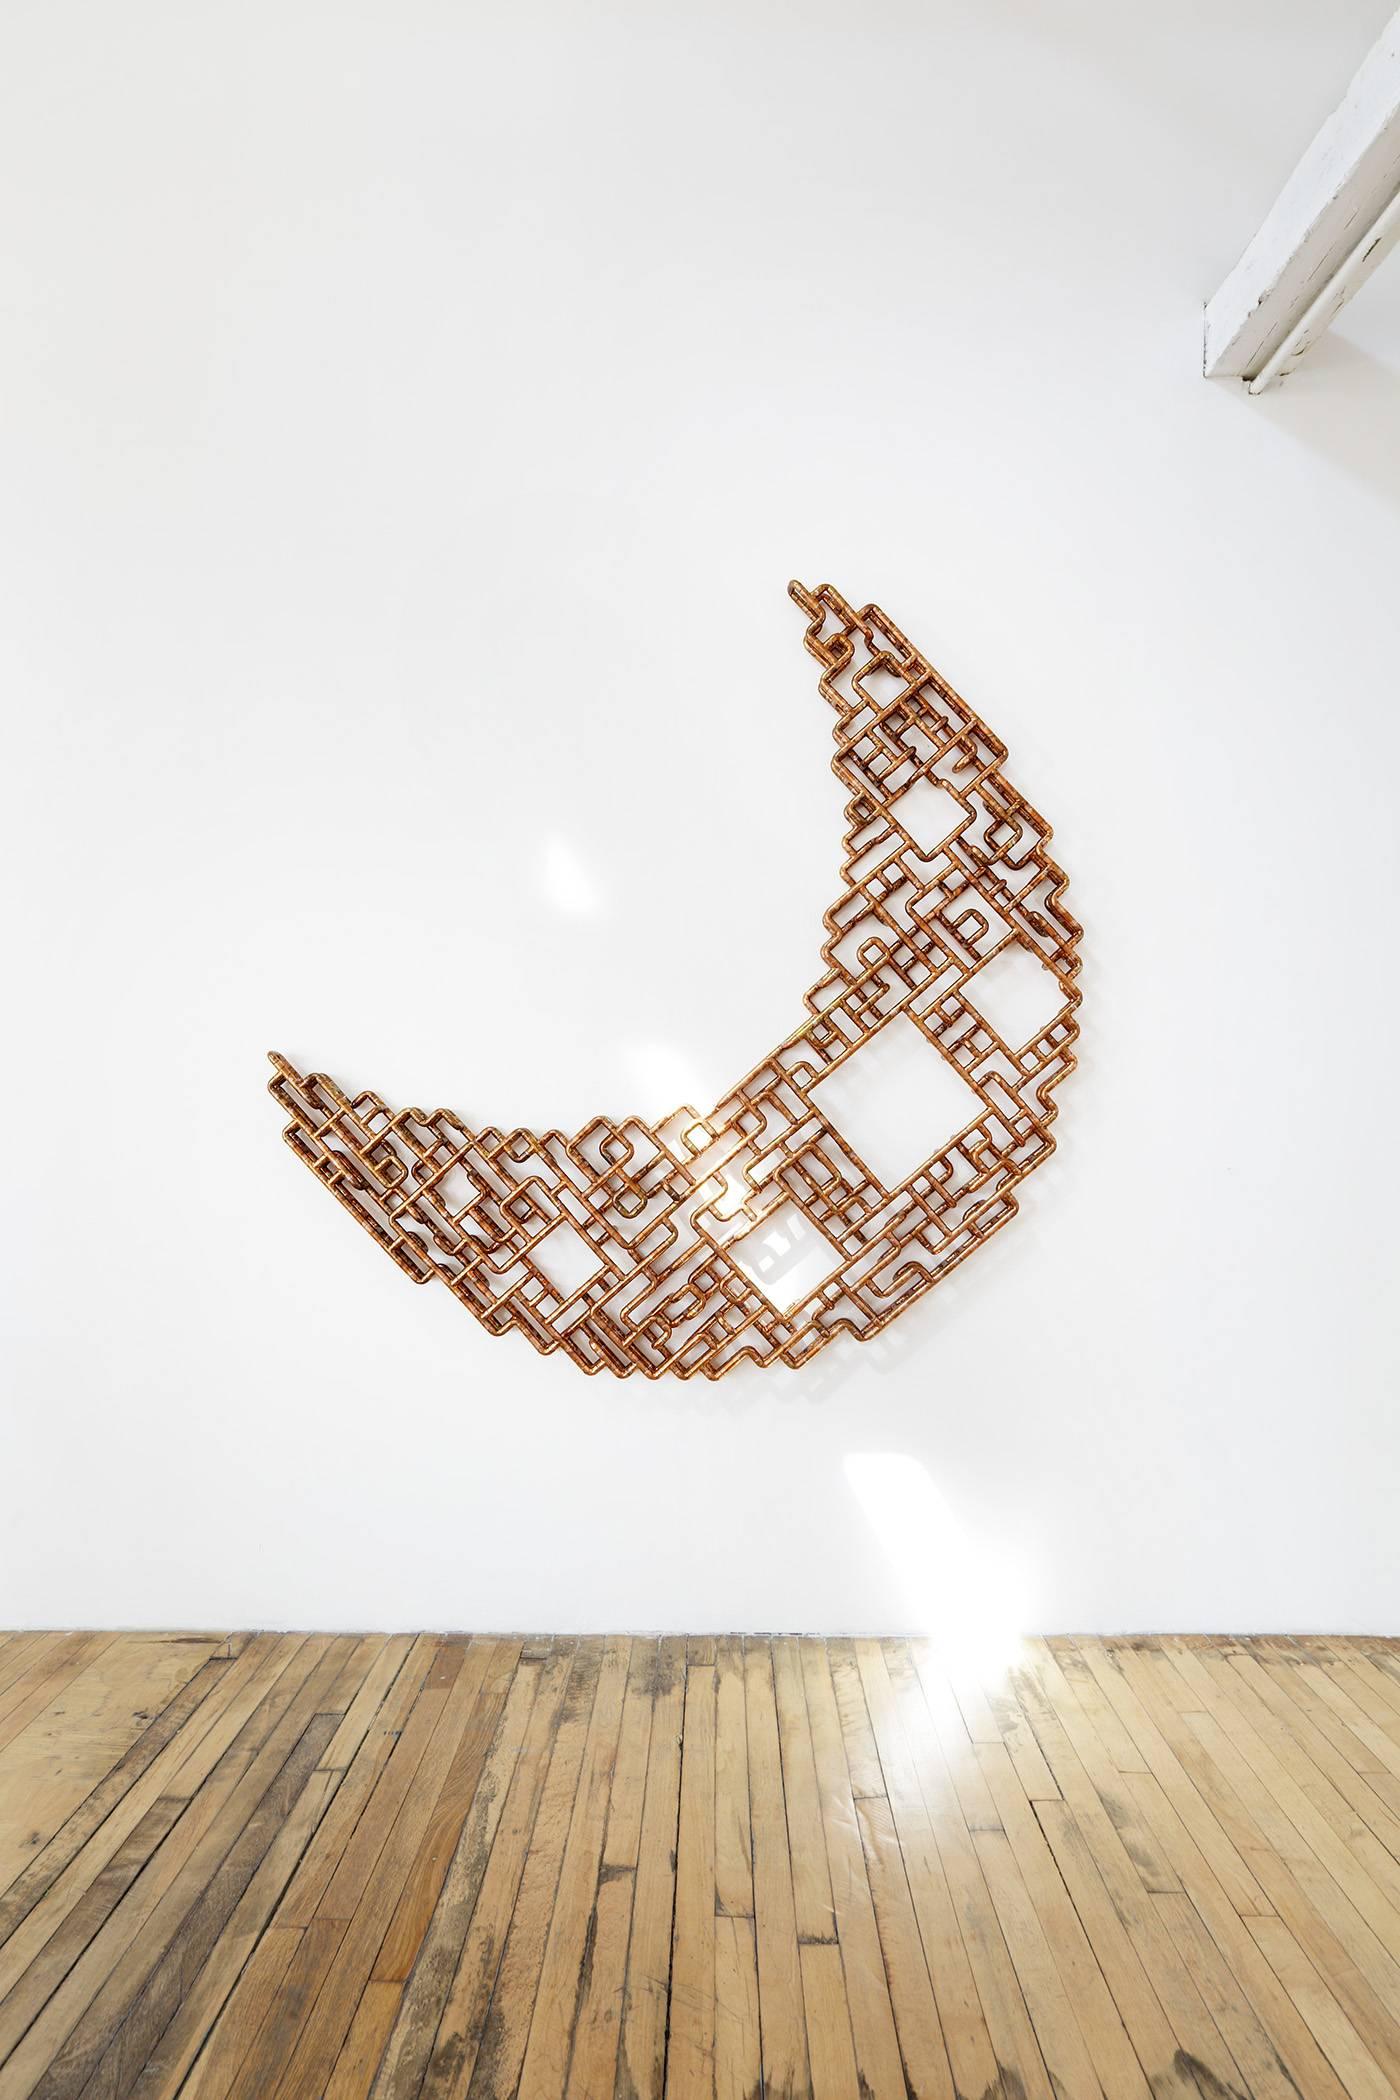 Title: Selenoglyph, #2
Year: 2015

Selenoglyph, #2 (“written upon the moon”) is a large-scale, wall-mounted sculpture executed entirely in half-inch copper tubing. Its inspiration is derived from the Greek lunar goddess, Selene, and the copper’s